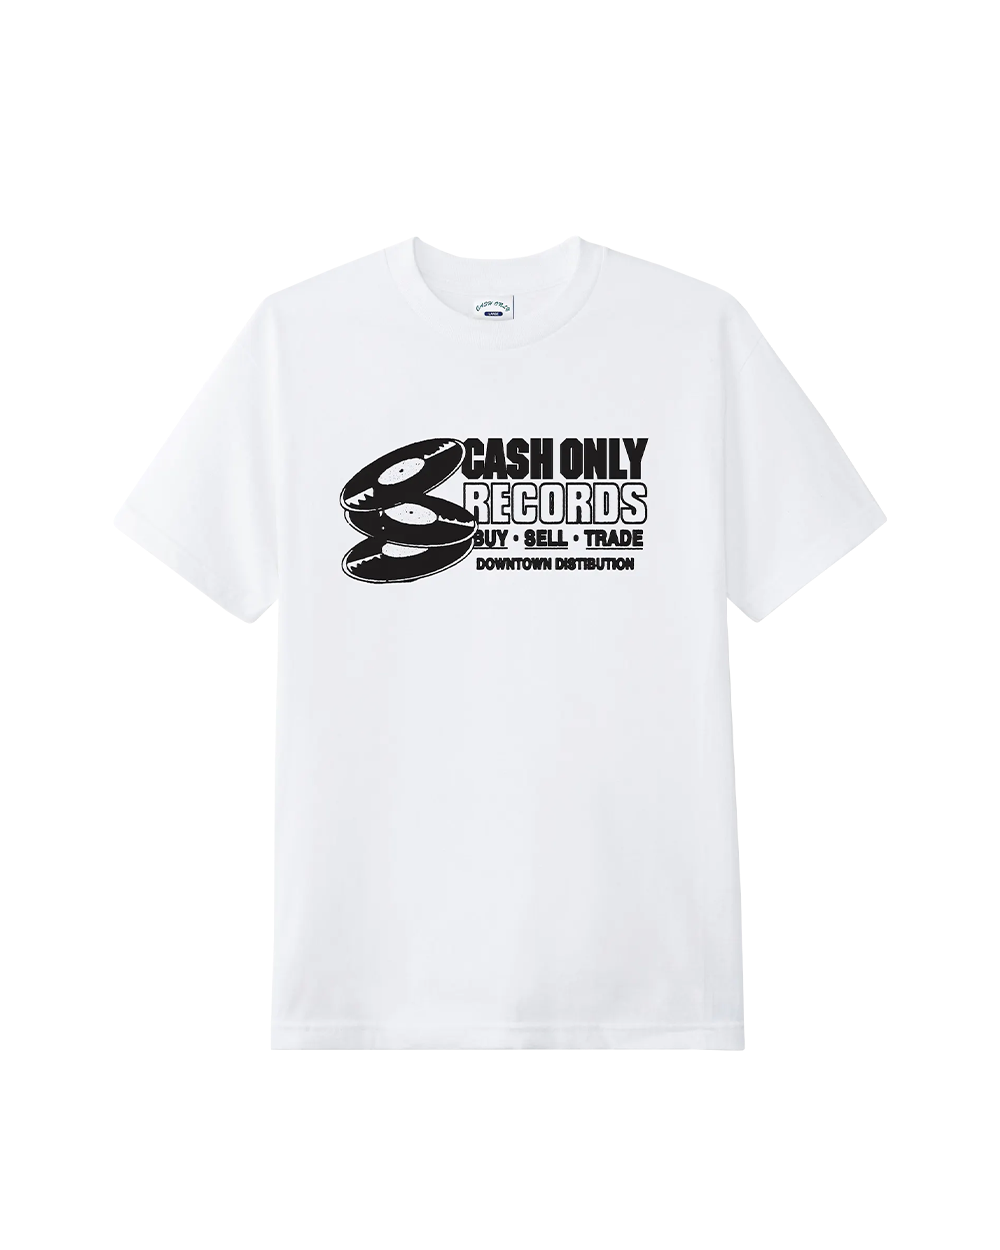 Promotional Use Tee White